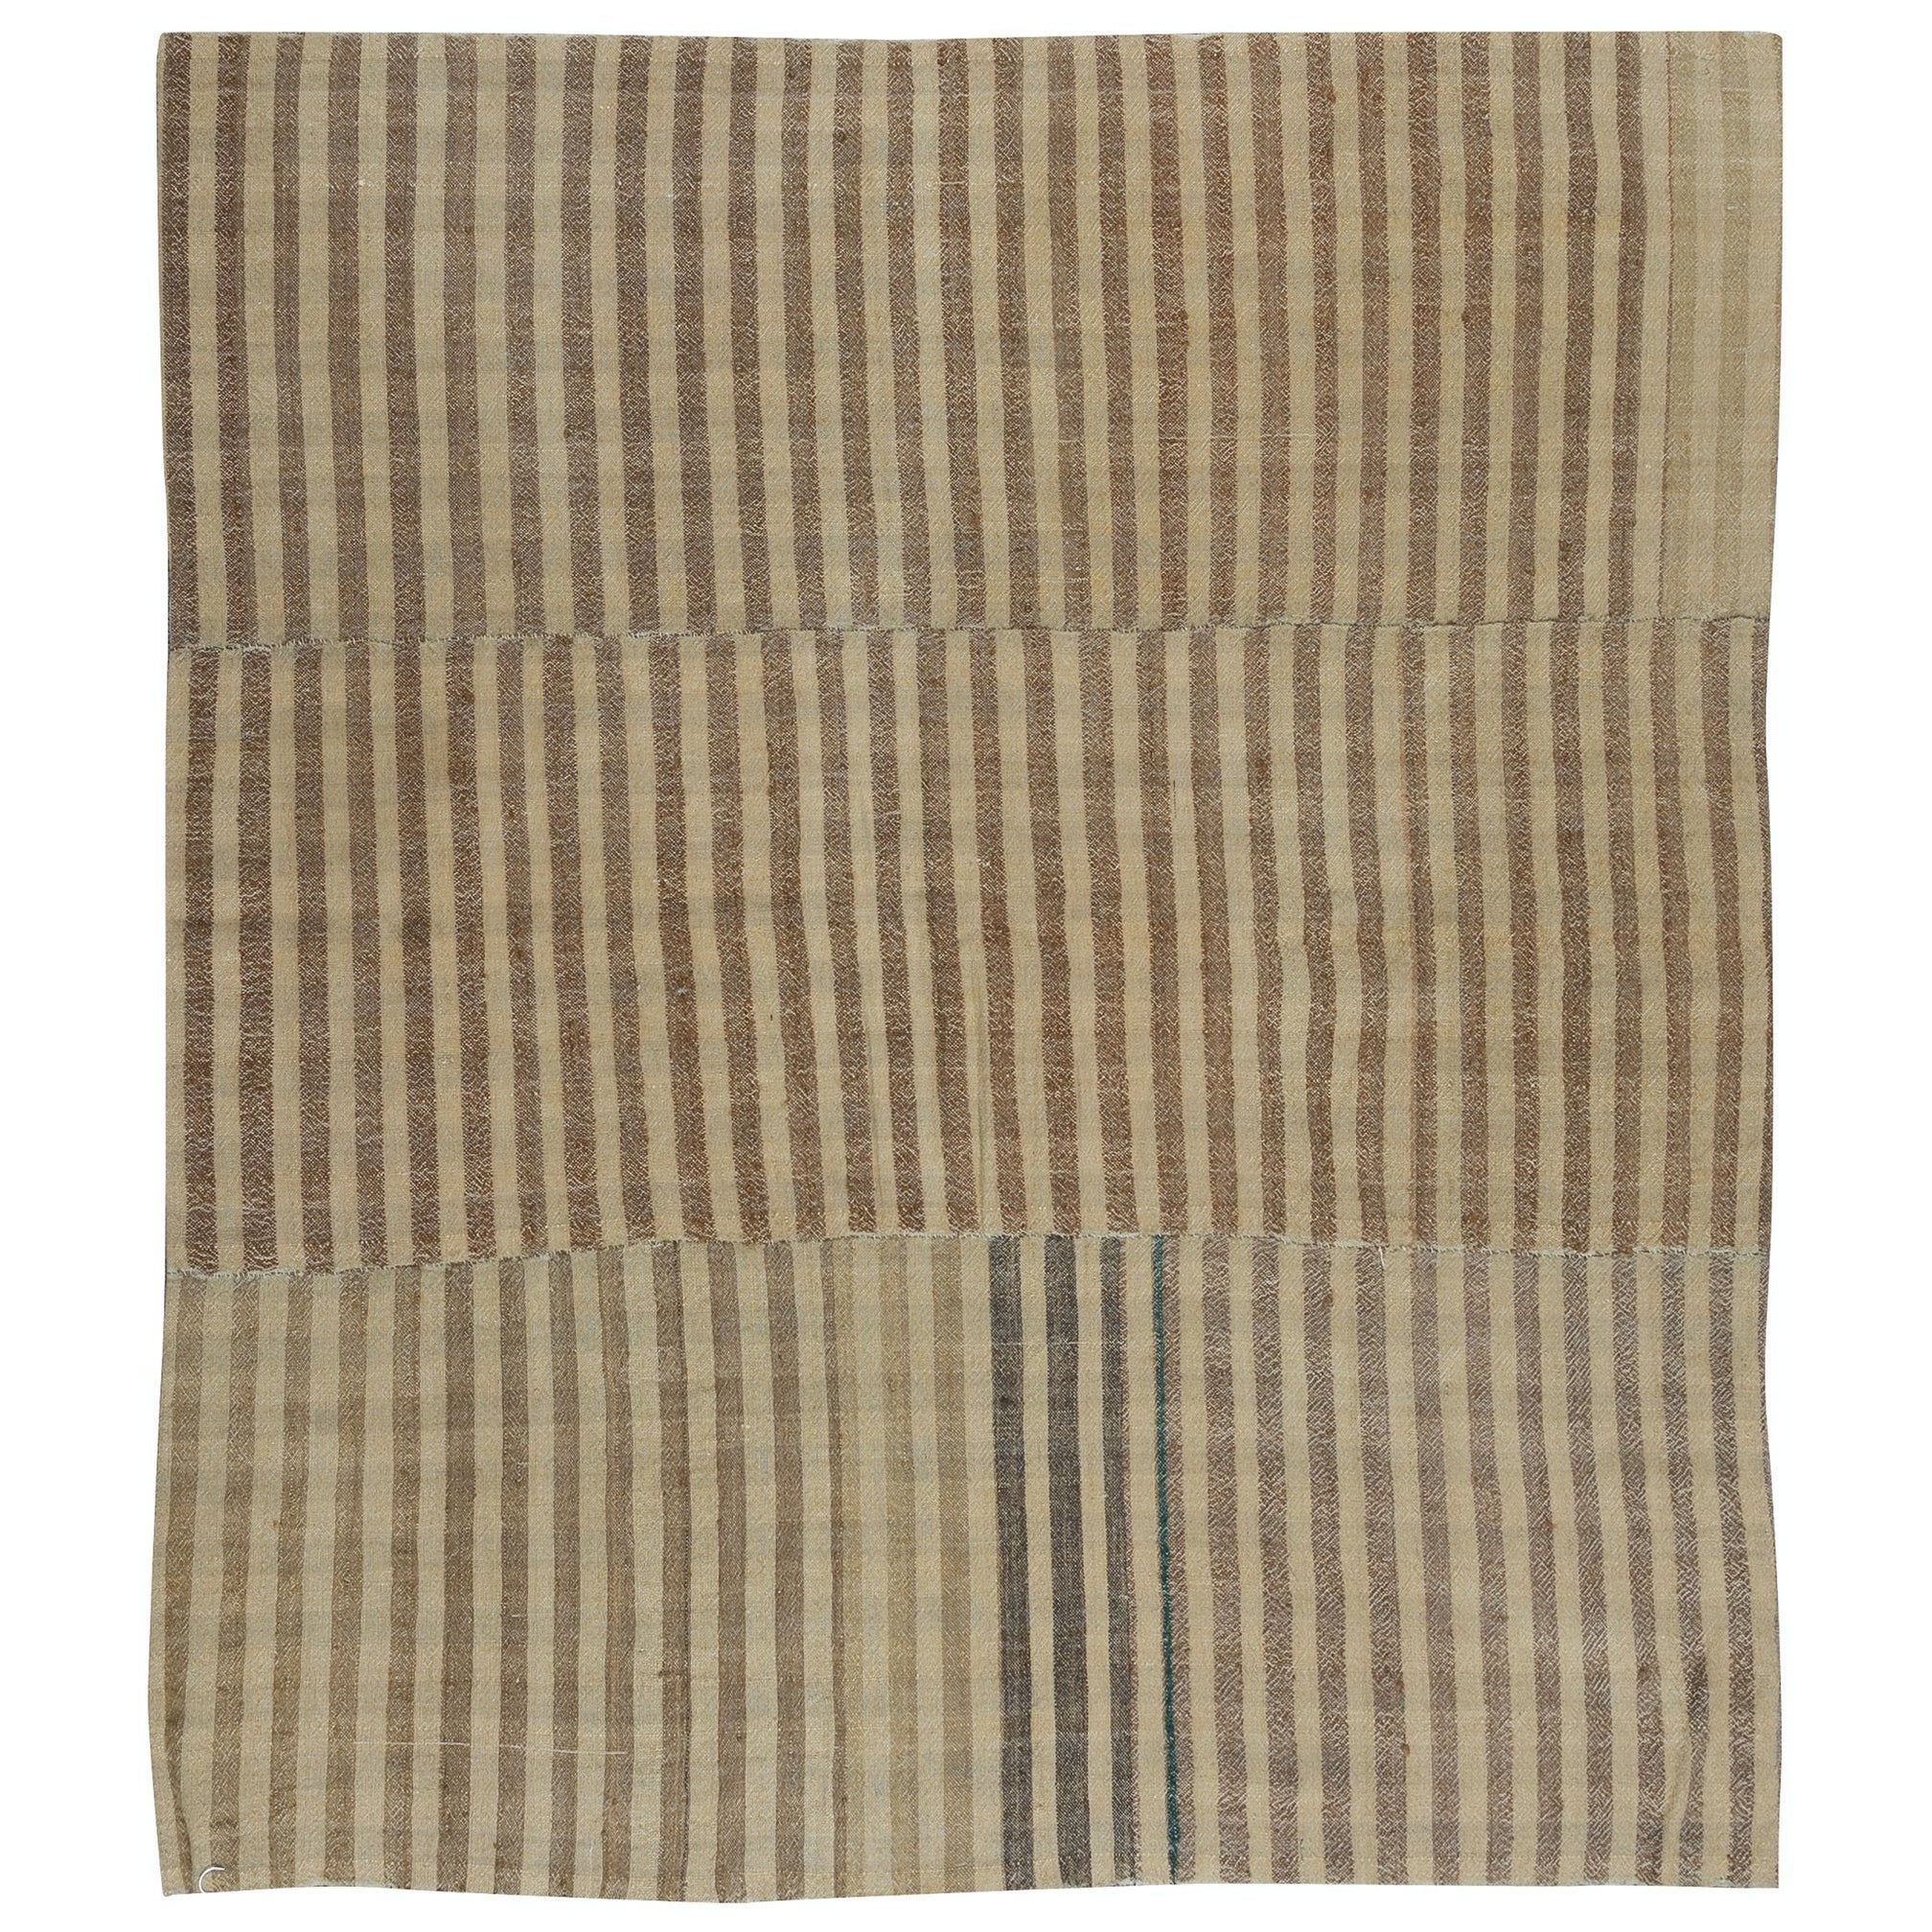 4.2x4.6 Ft Flat-Weave Vintage Anatolian Kilim, Hand-Woven Striped Rug, 100% Wool For Sale